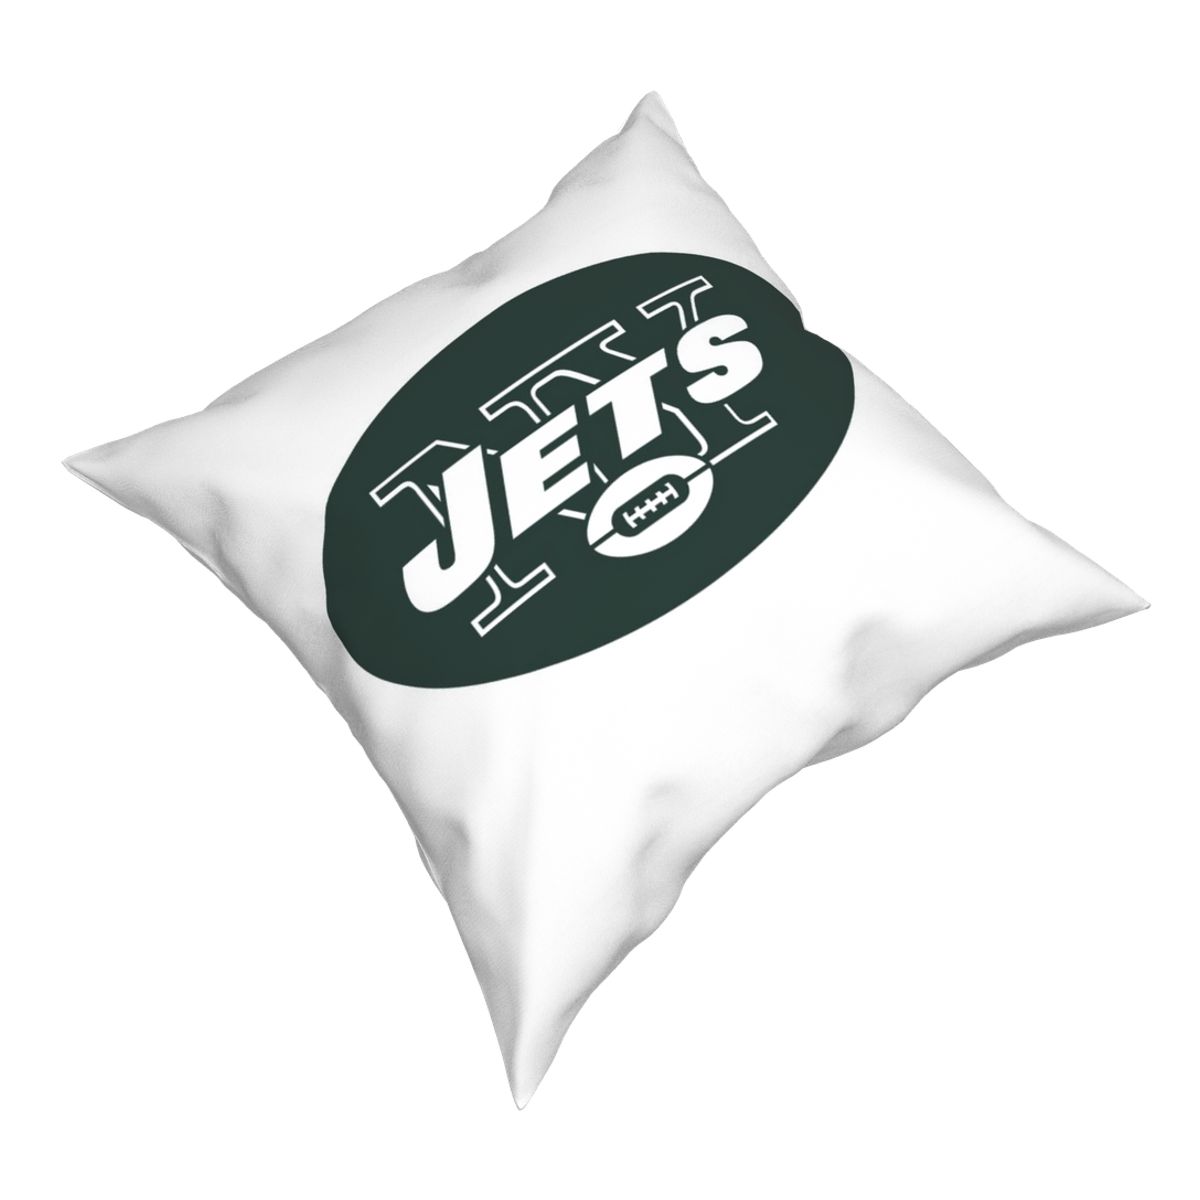 Custom Decorative Football Pillow Case New York Jets White Pillowcase Personalized Throw Pillow Covers